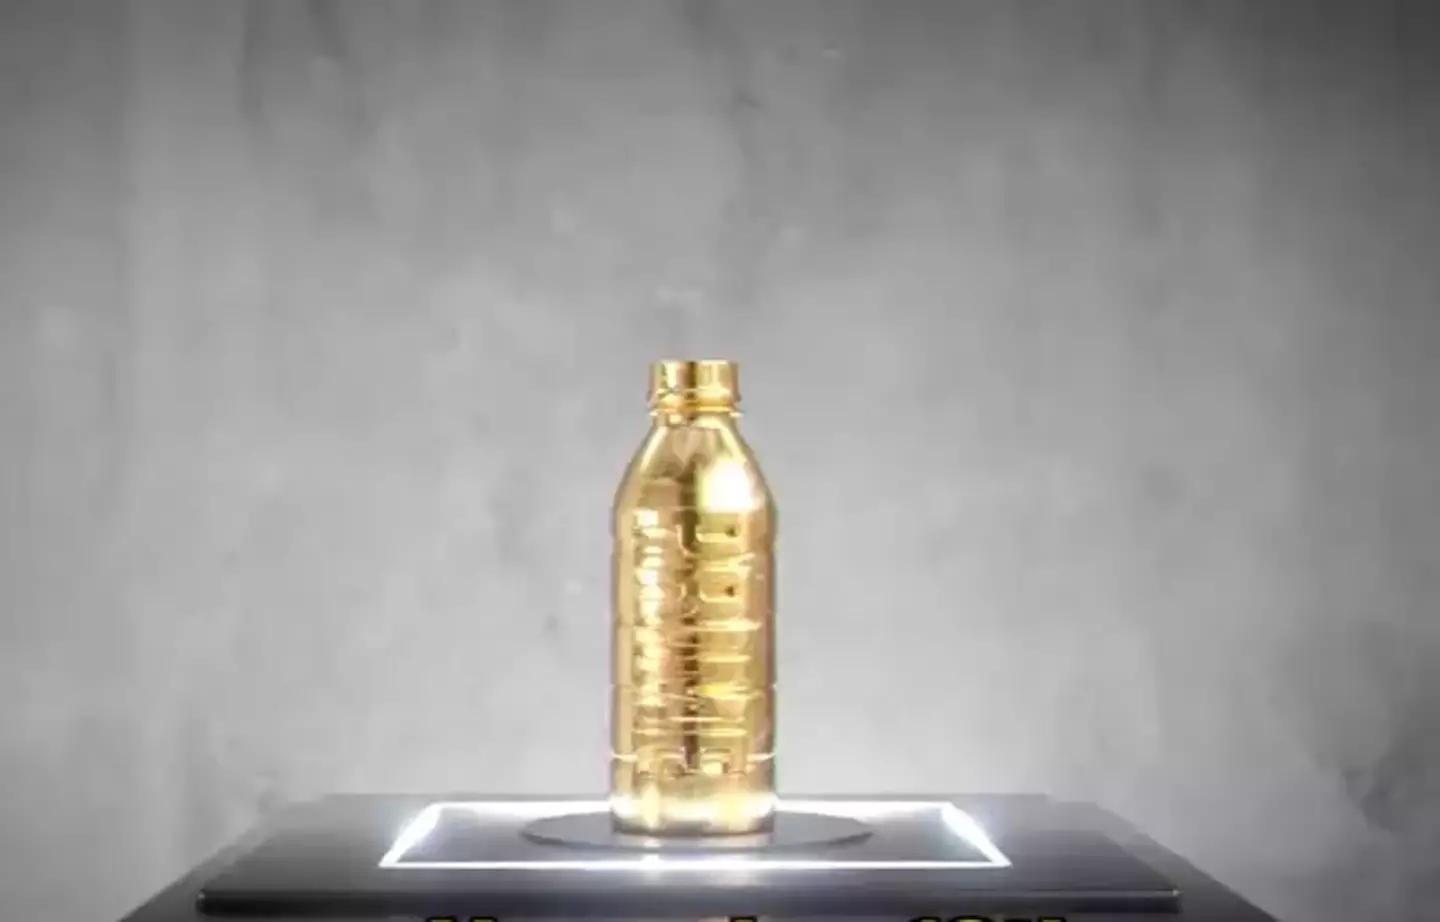 KSI and Logan Paul's announcement of a £400,000 Prime Gold Bottle has sent fans into a frenzy.